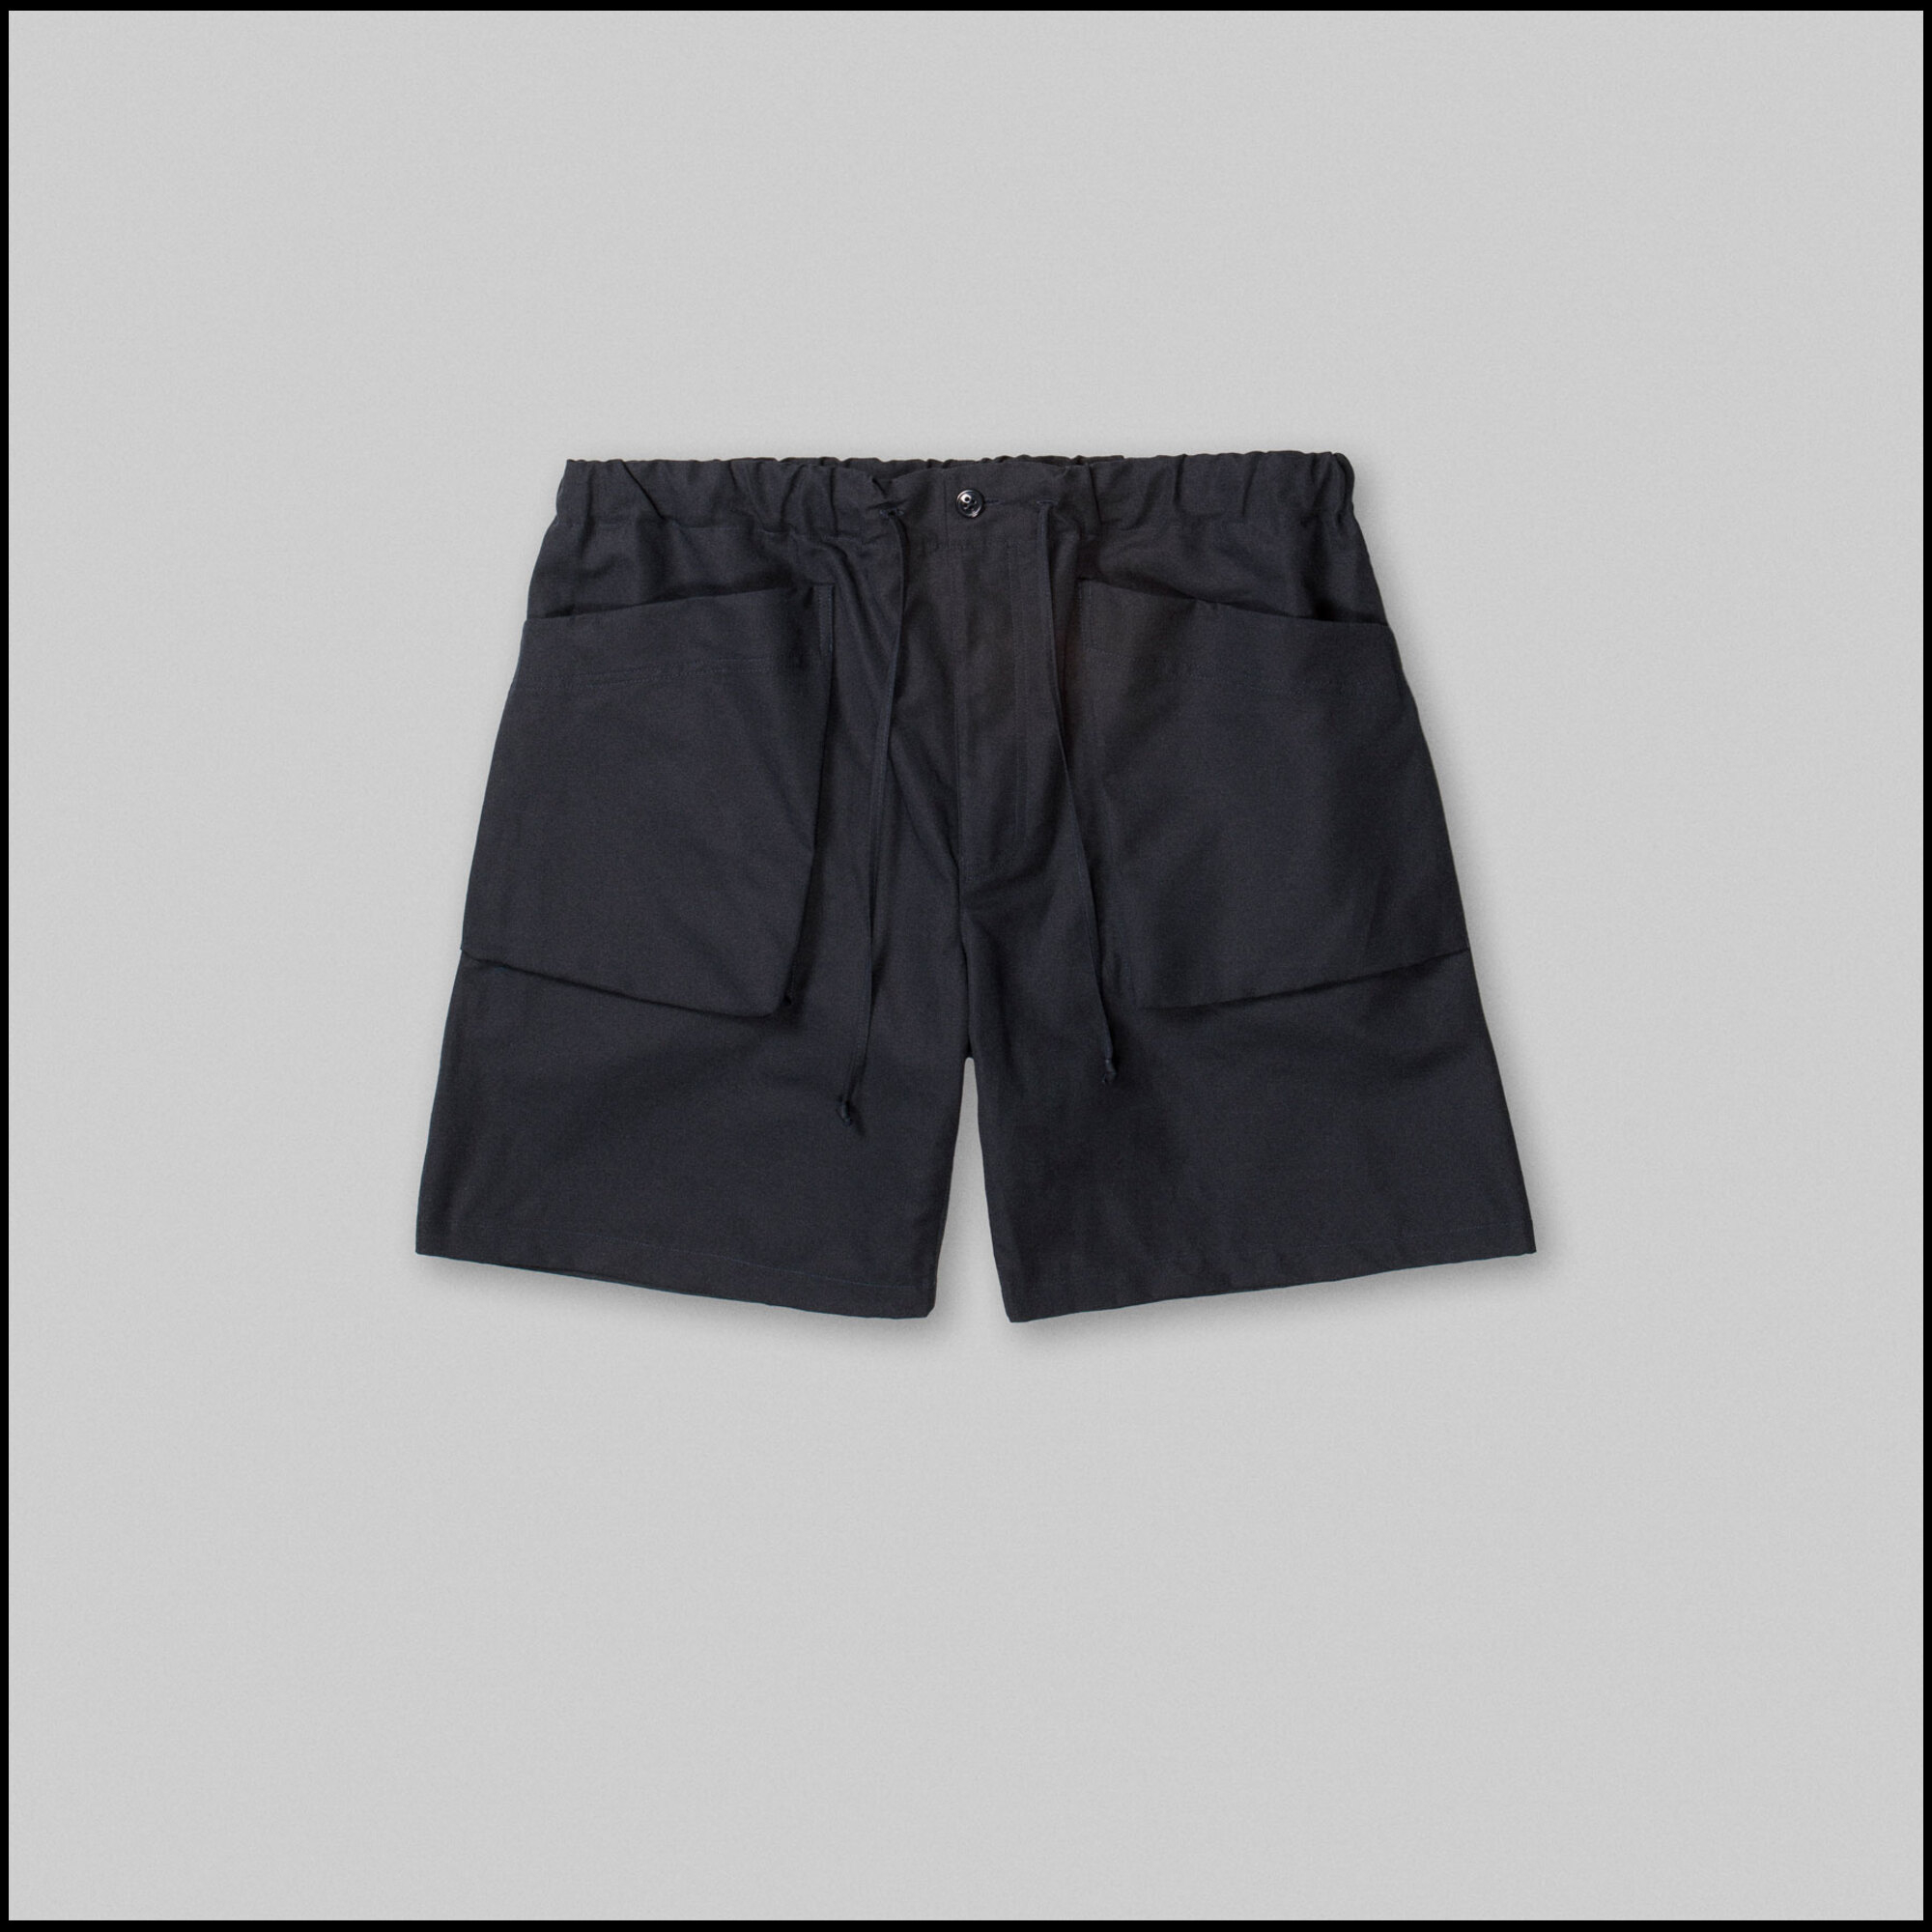 CARGO Shorts by Arpenteur in Midnight color